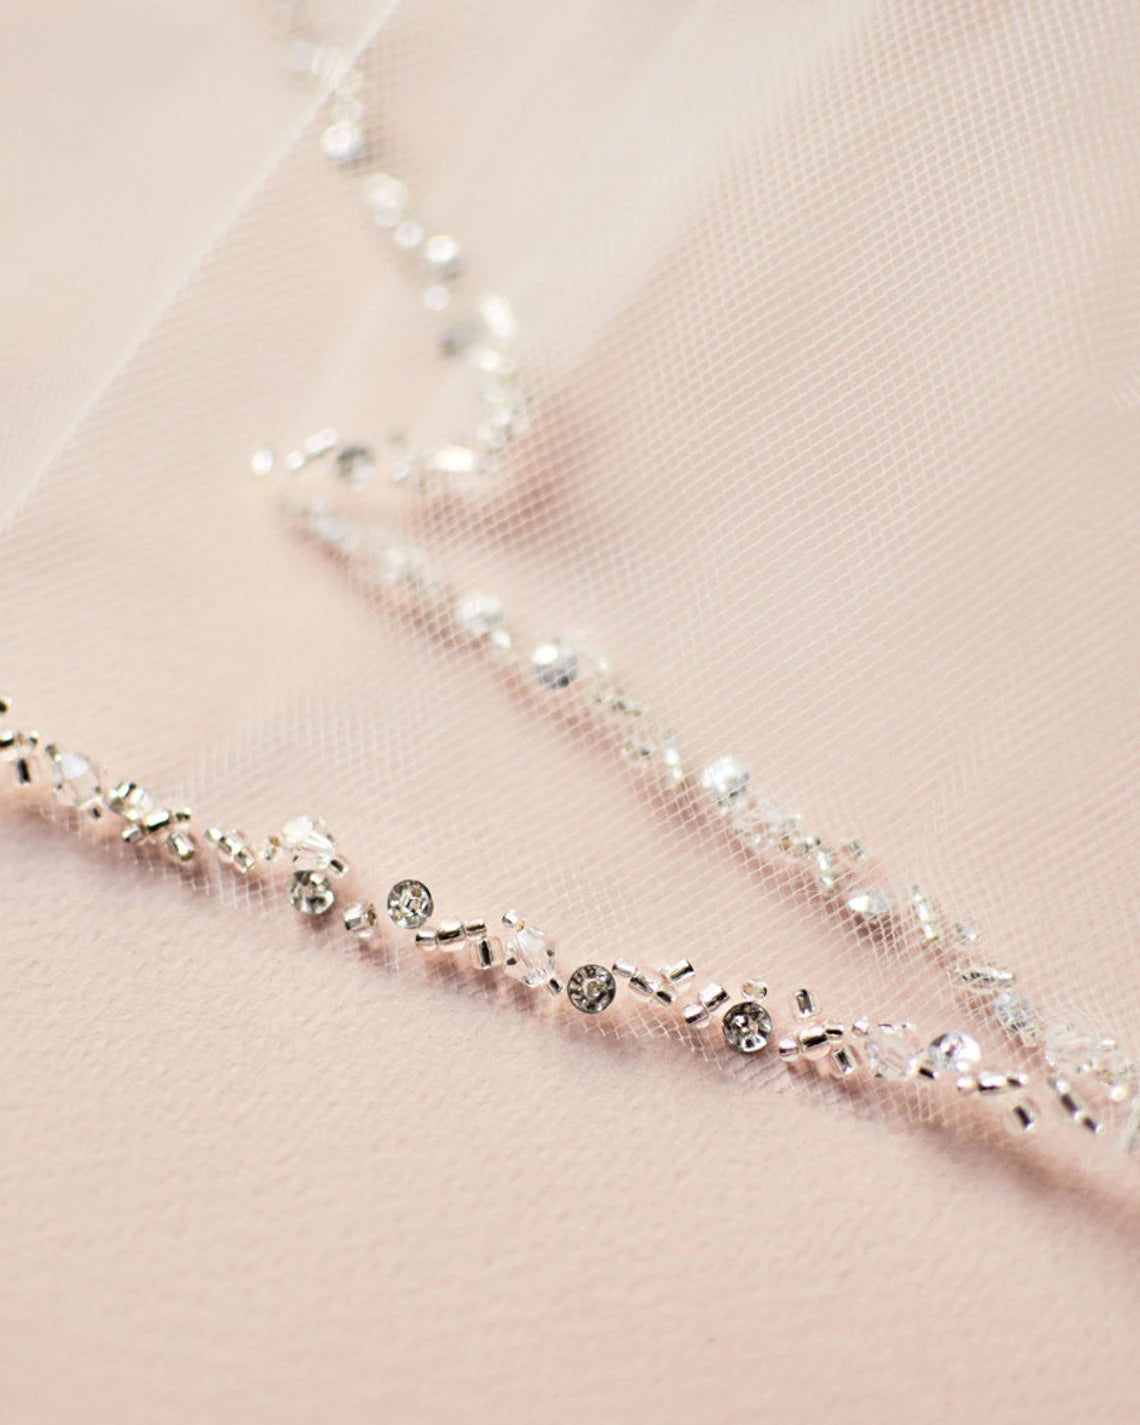 Close-up of a delicate tulle fabric with intricate bead and sequin embellishments, perfect for bridal shops, on a soft pink background featuring the Bergamot Bridal Fingertip Length Crystal Beaded Veil.